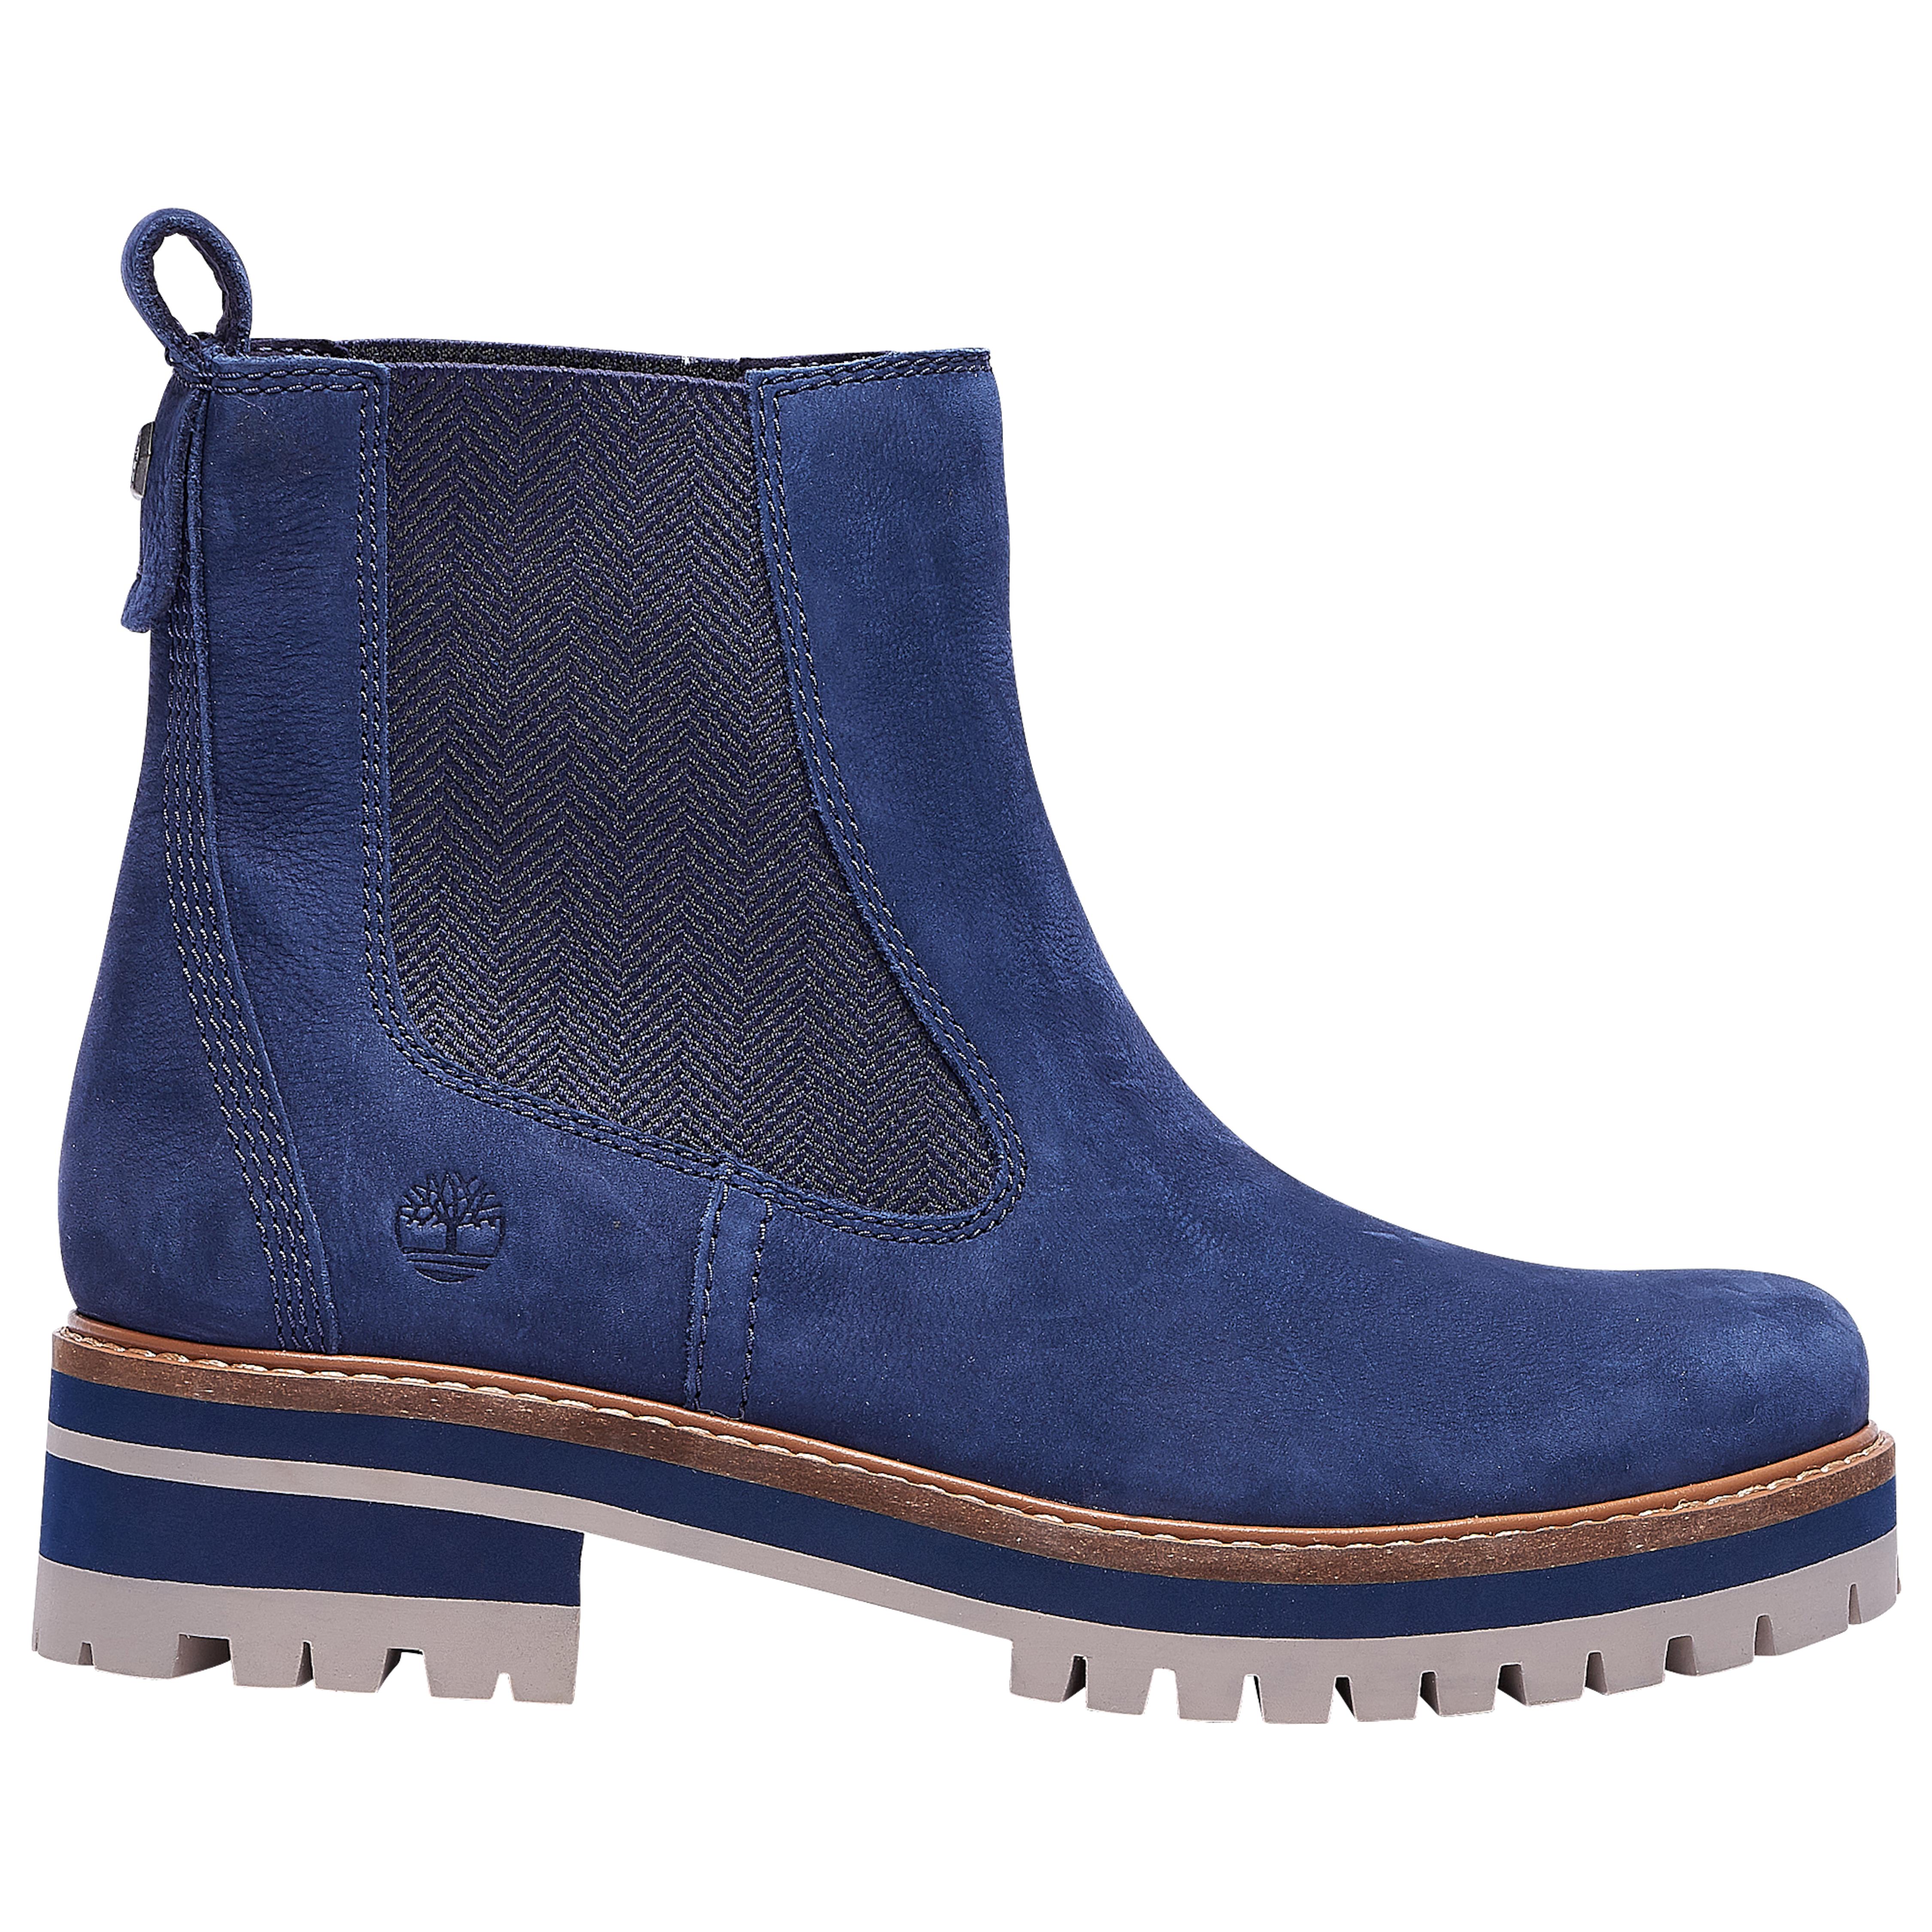 Timberland Courmayeur Valley Chelsea Boot in Navy Nubuck (Blue) - Lyst